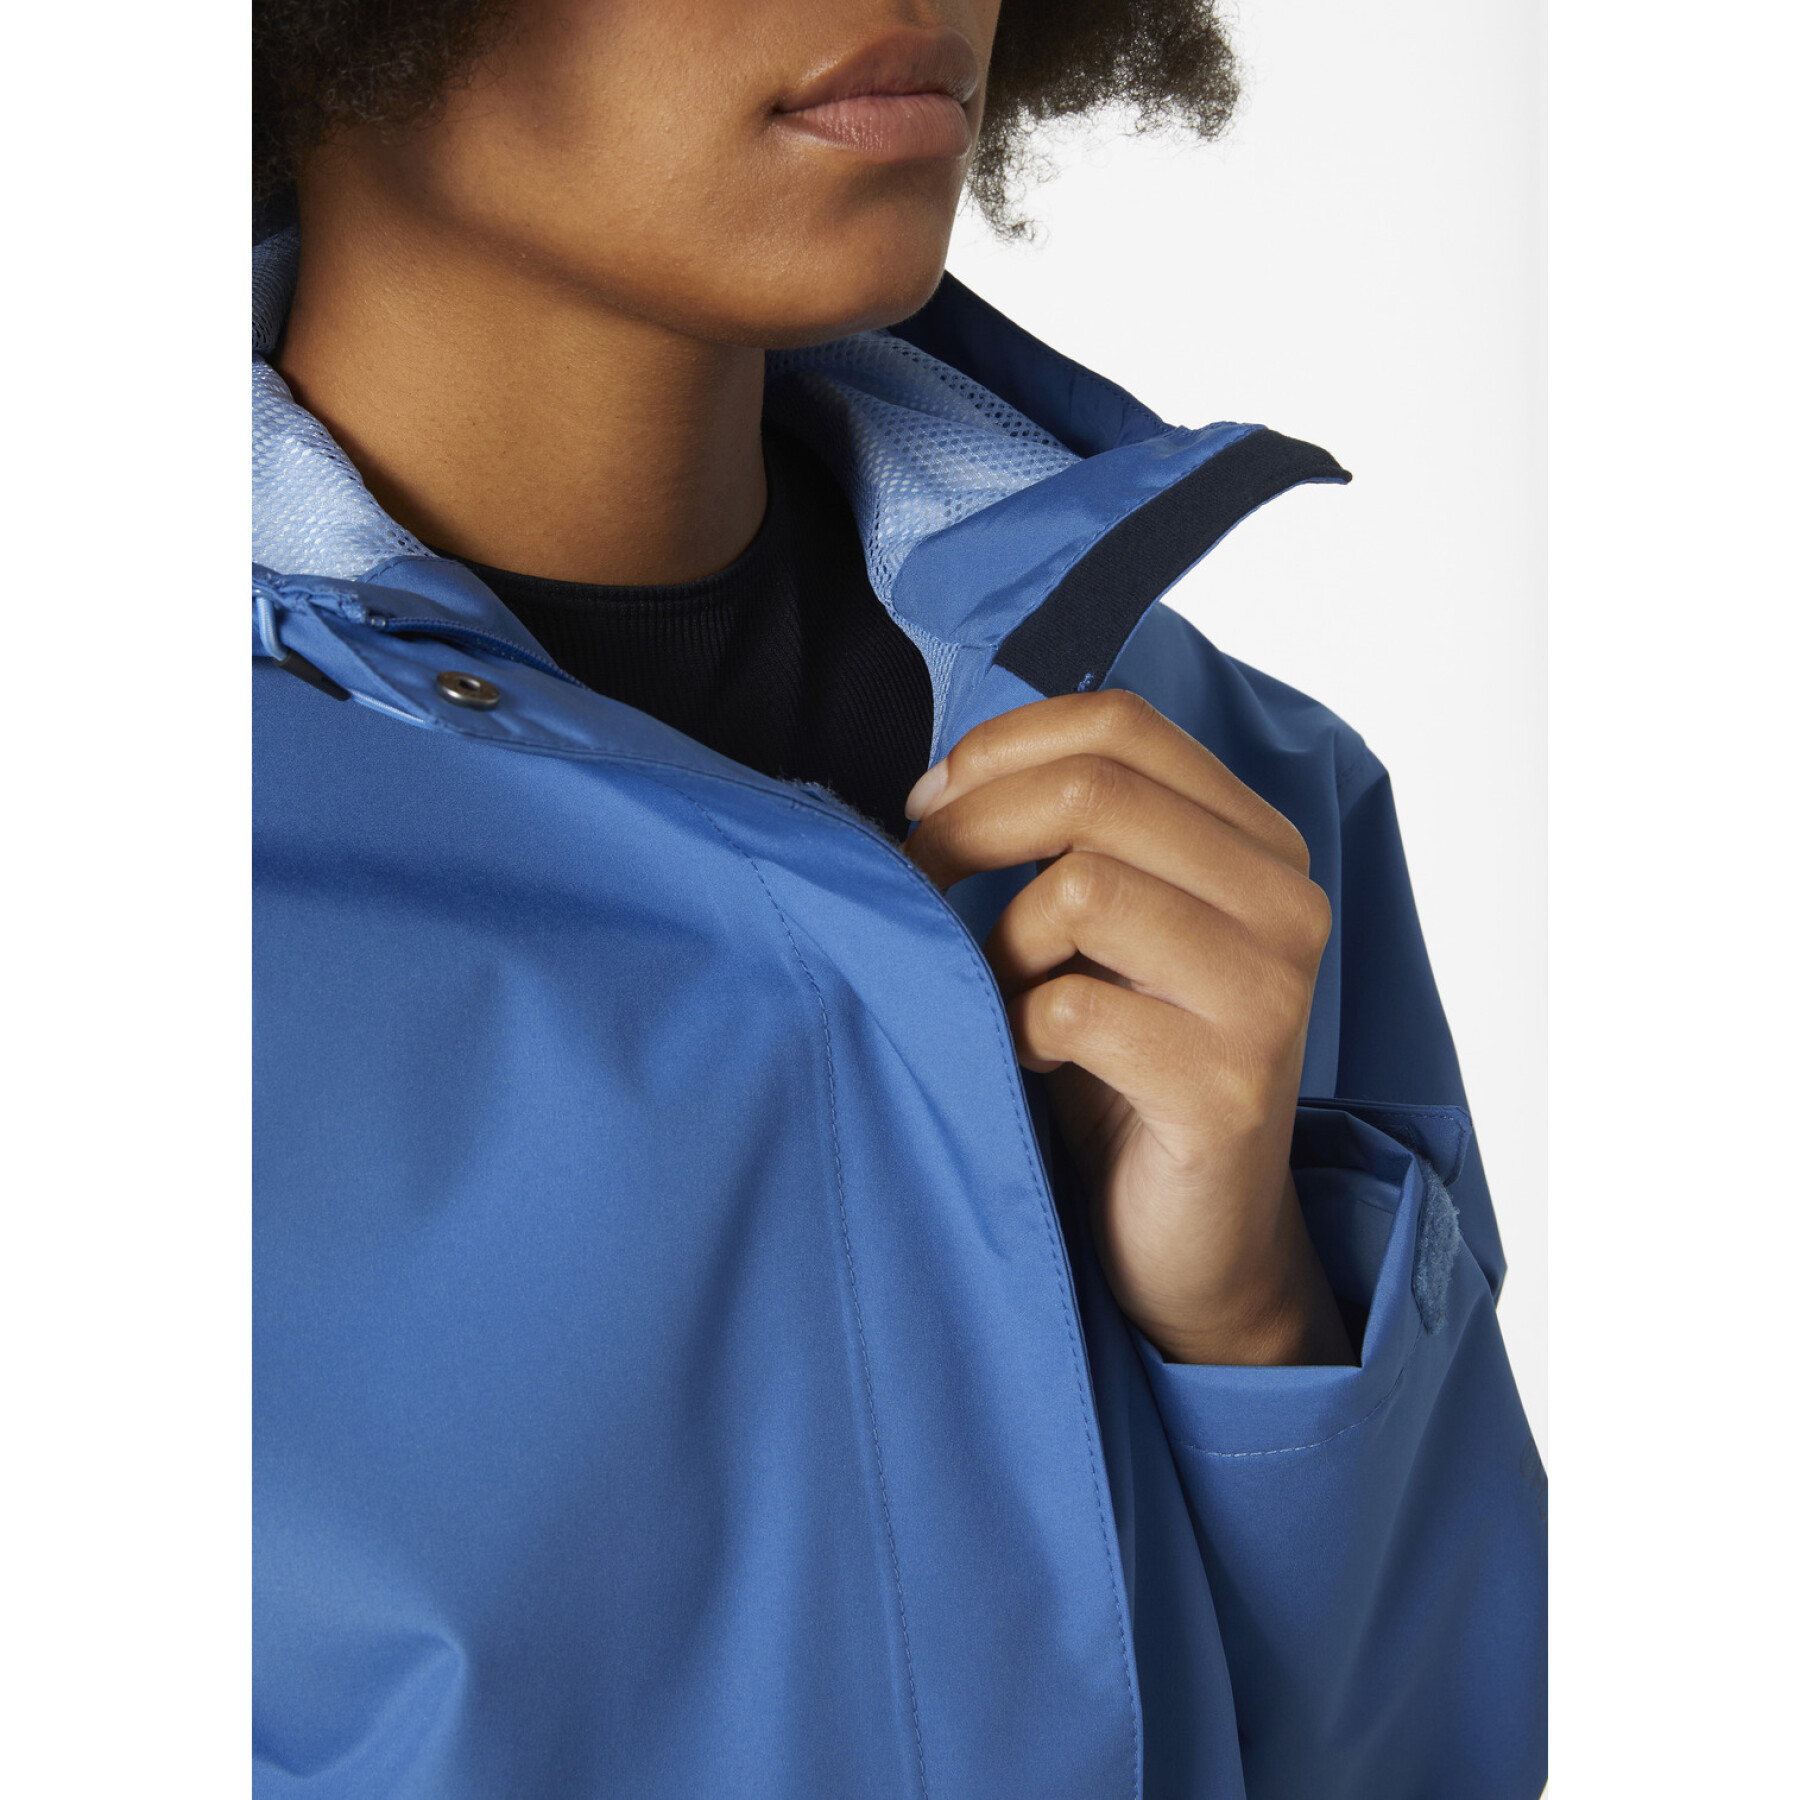 Chaqueta impermeable mujer Helly Hansen Seven J